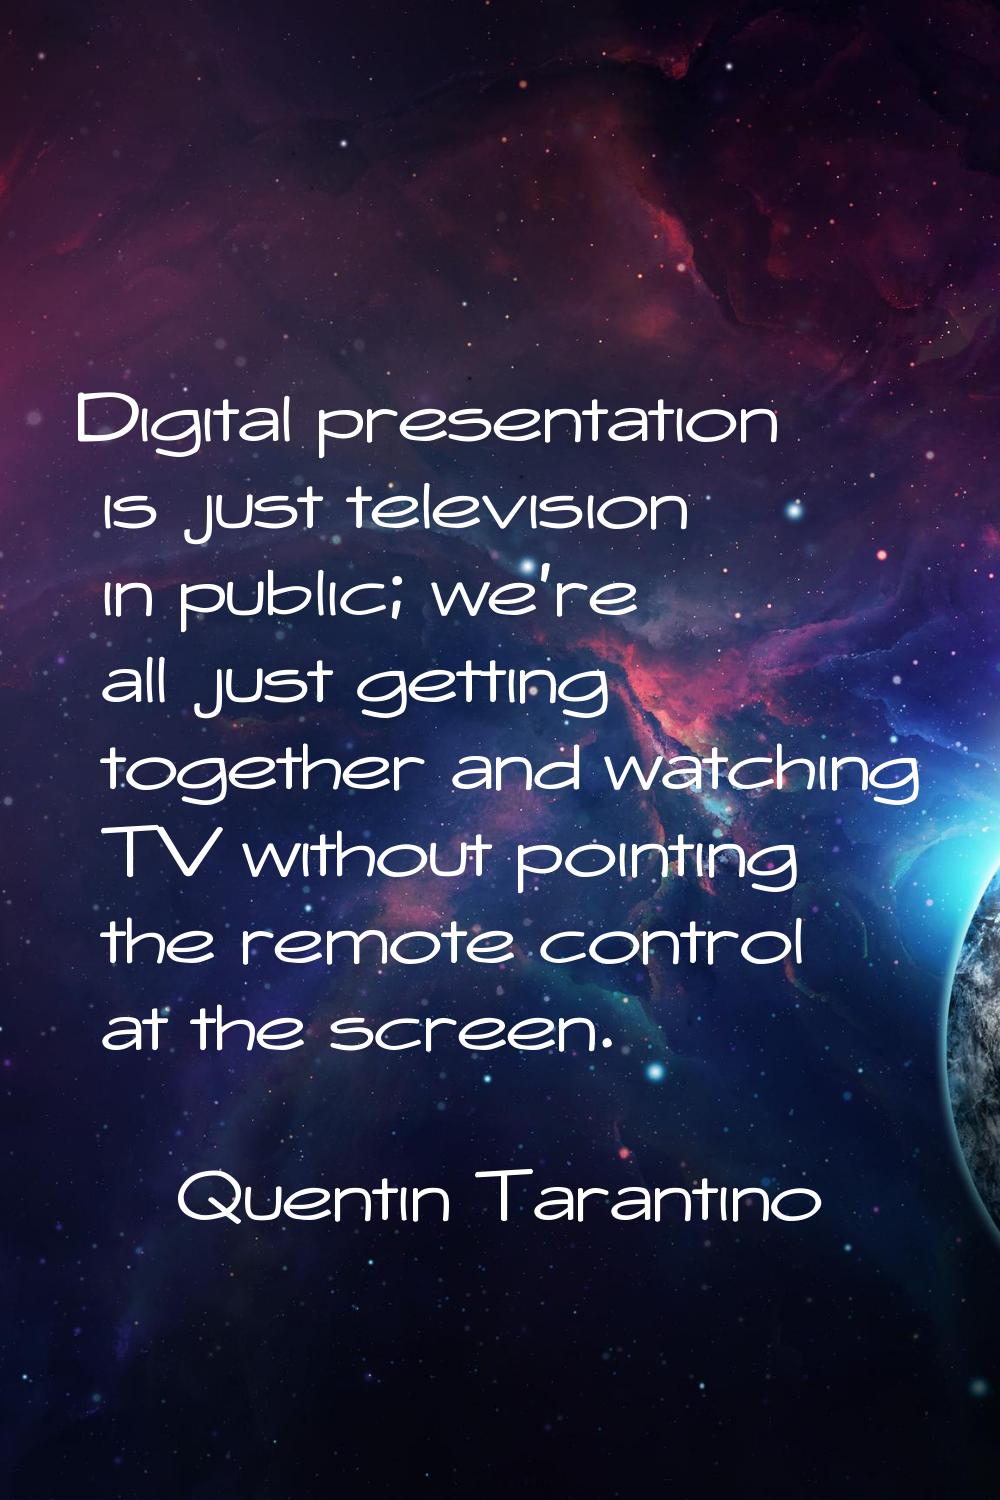 Digital presentation is just television in public; we're all just getting together and watching TV 